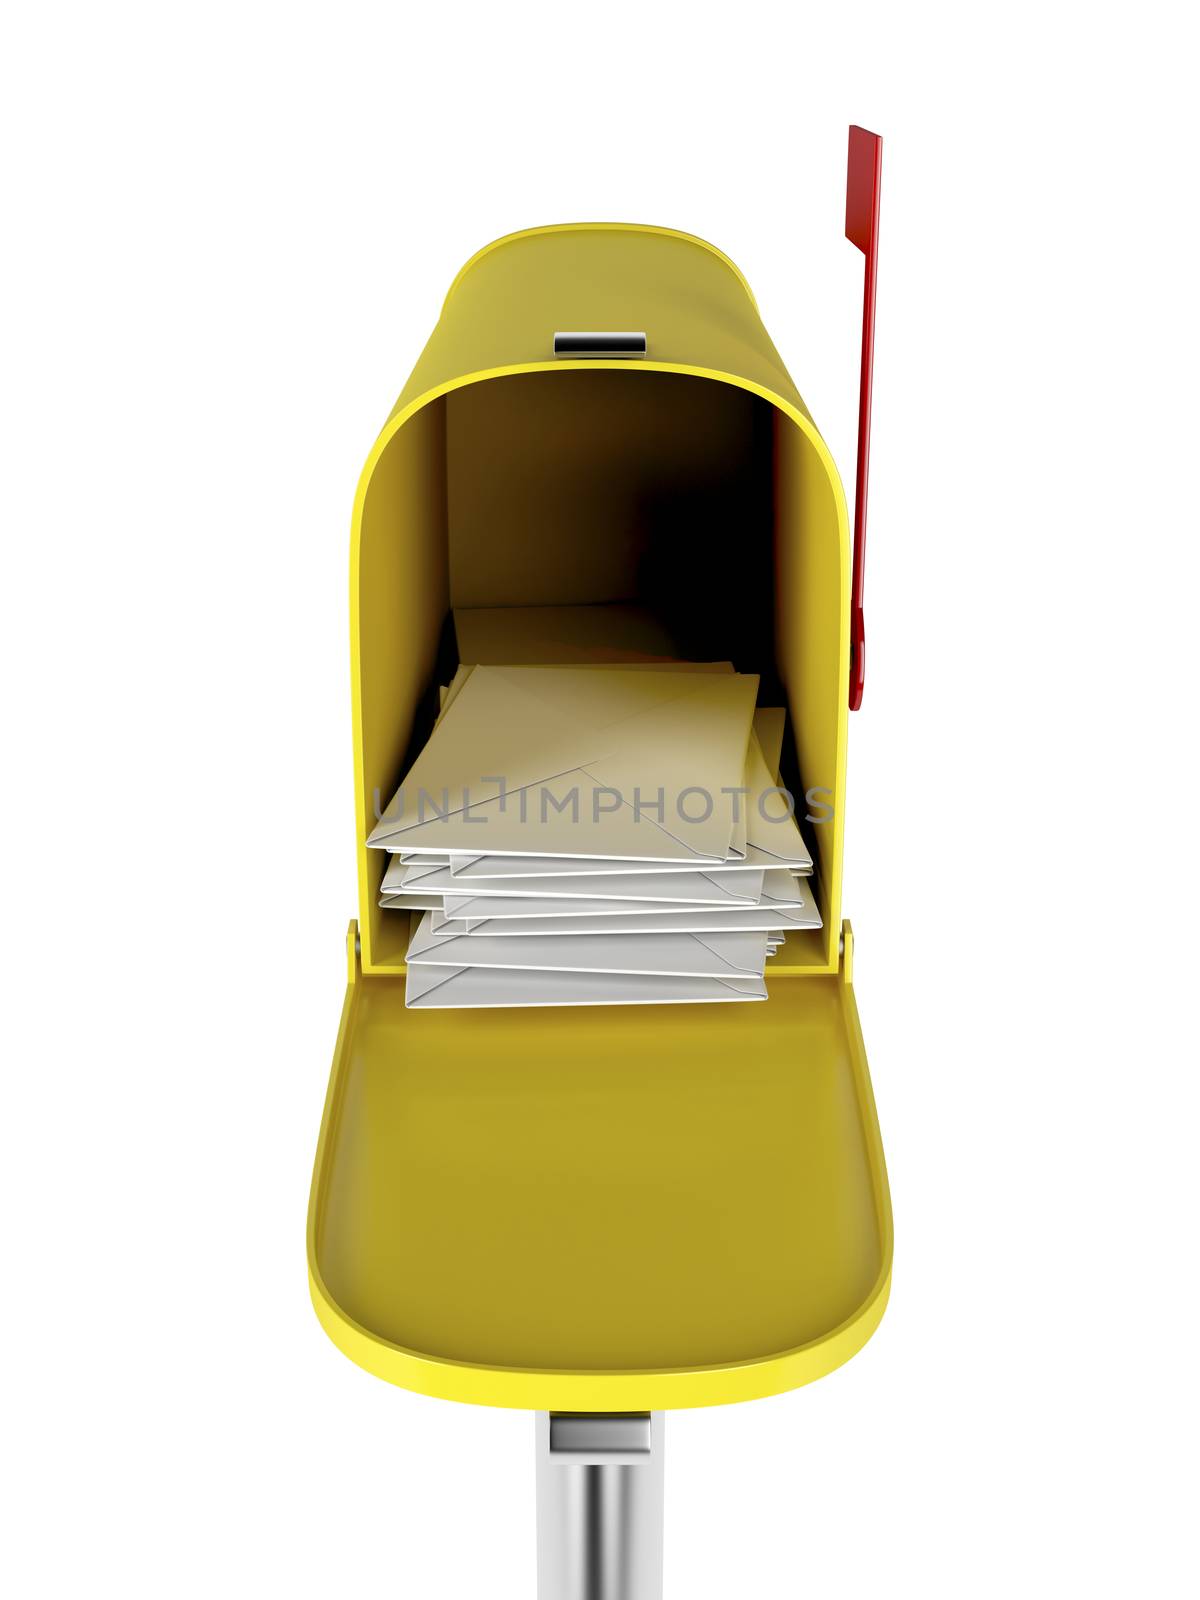 Mailbox by magraphics